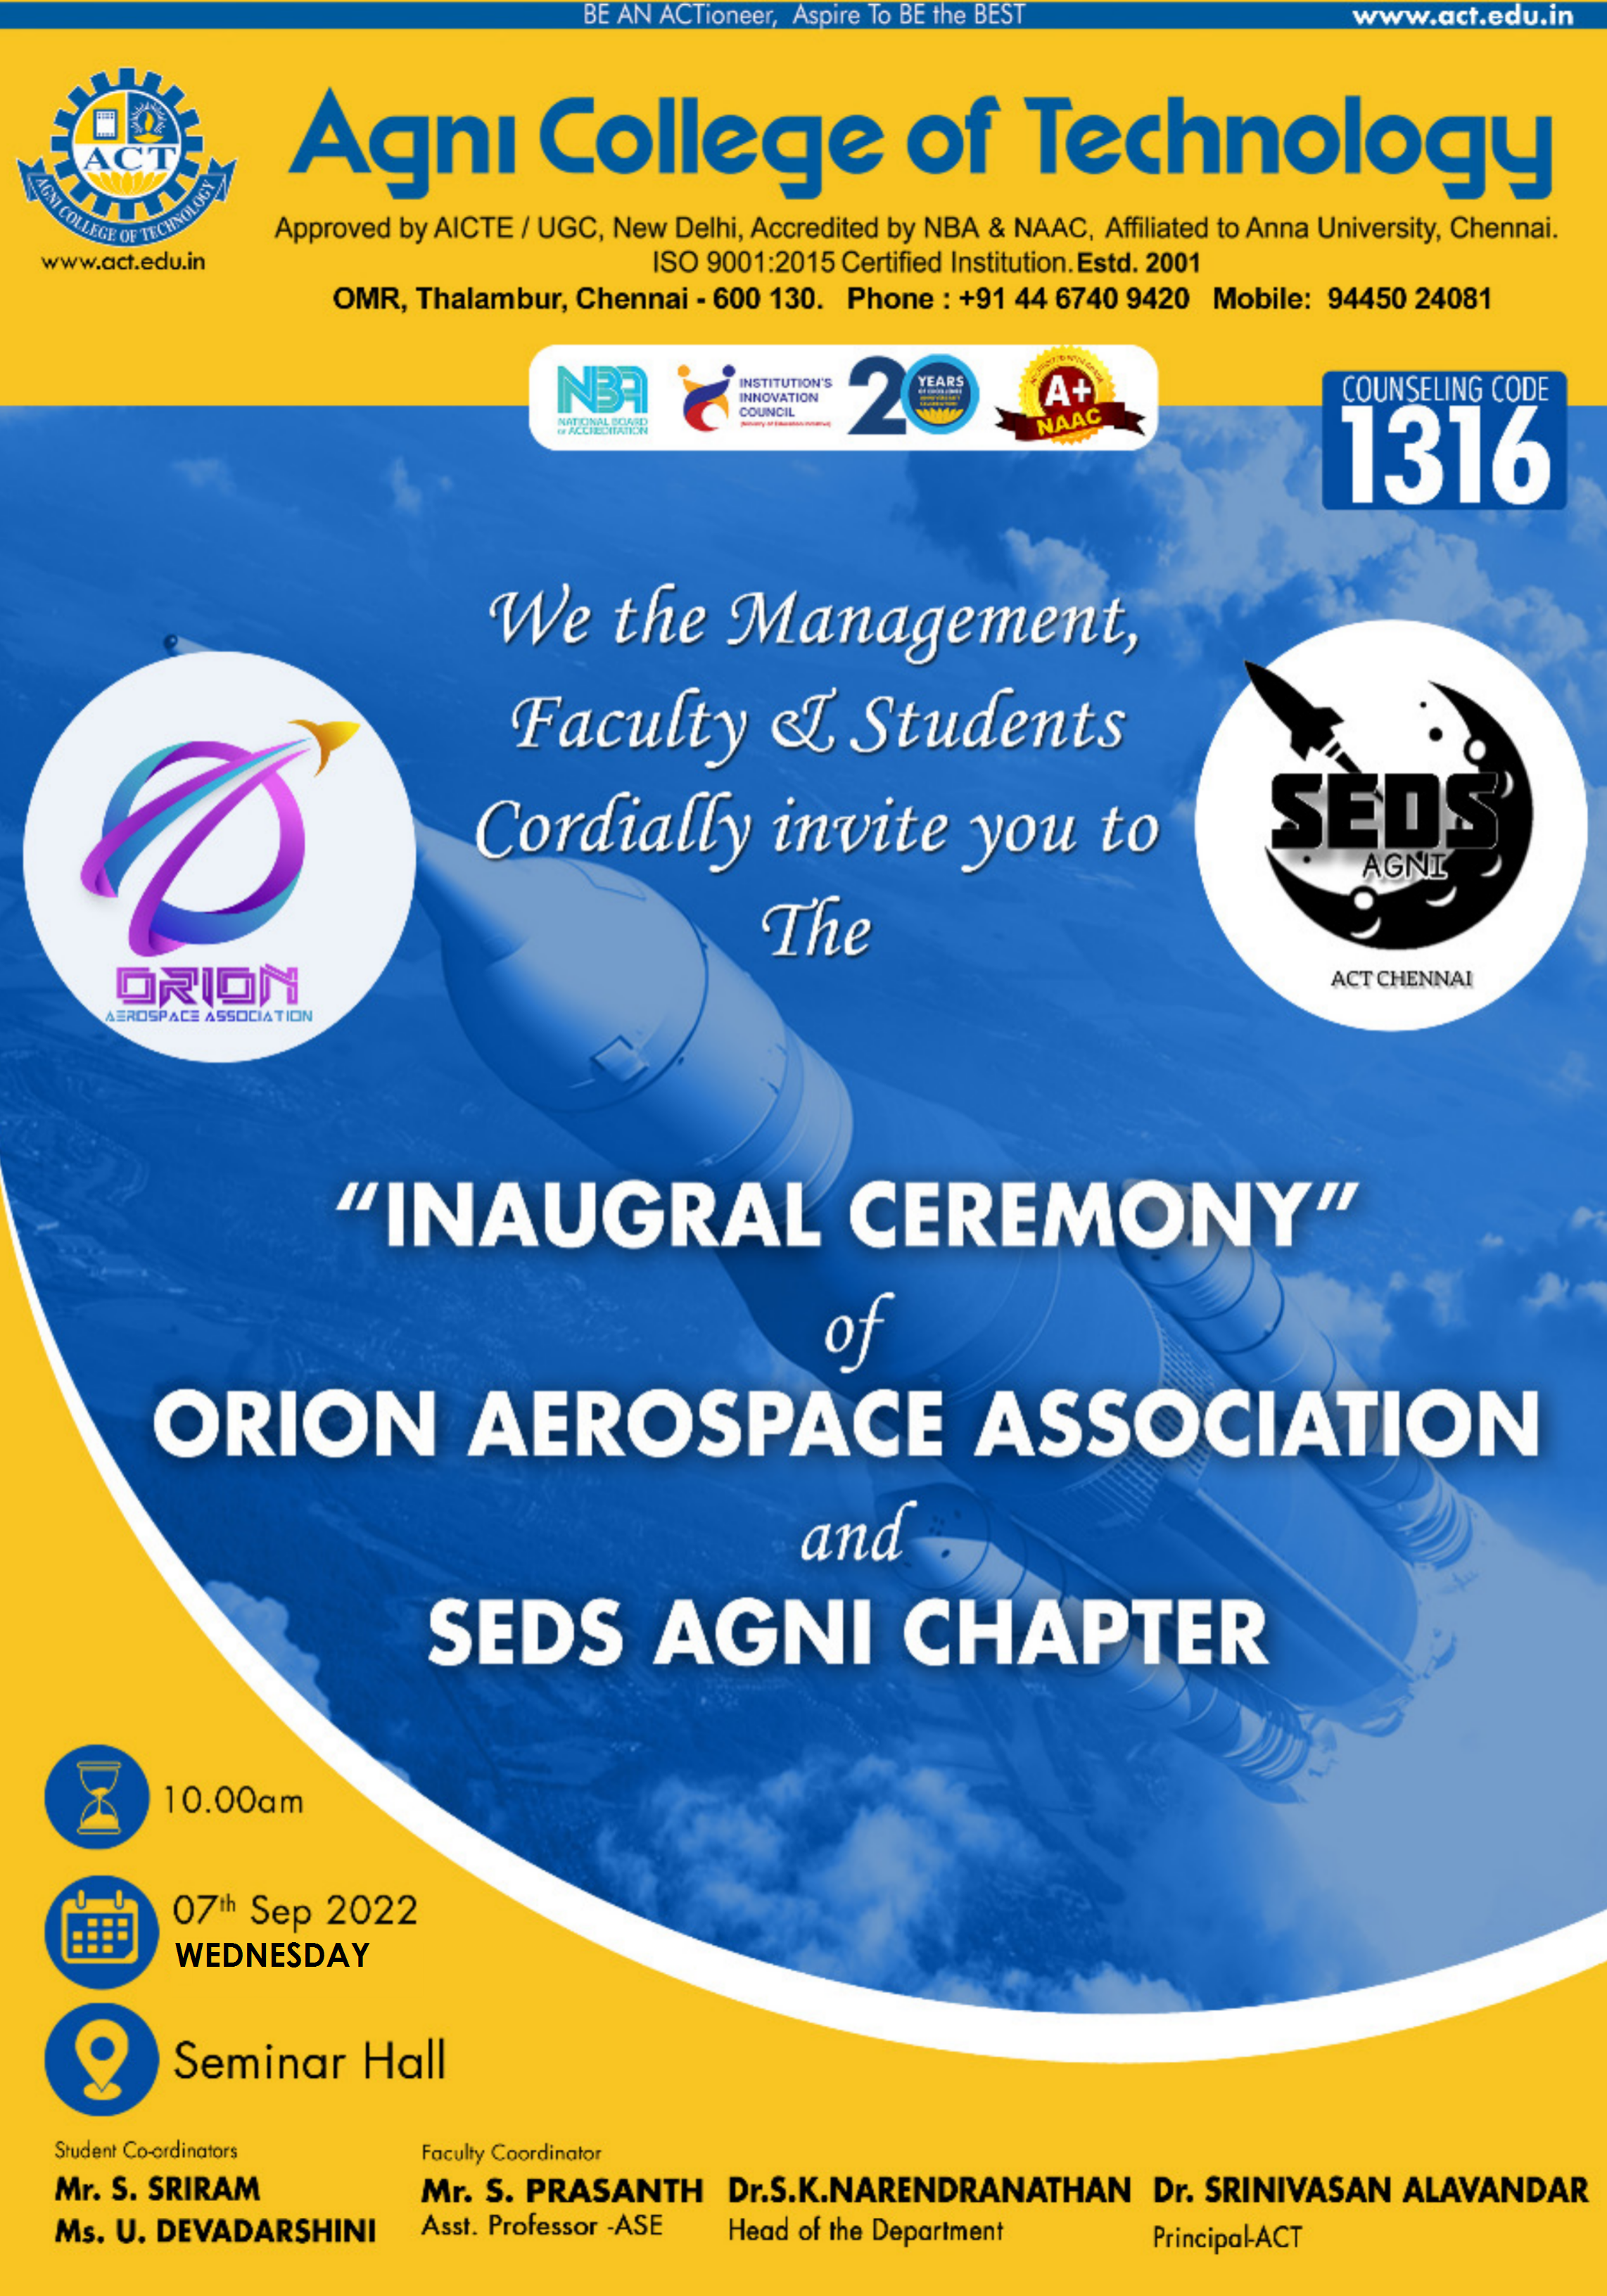 Inaugural Ceremony of Orion Aerospace Association and SEDS Agni Chapter